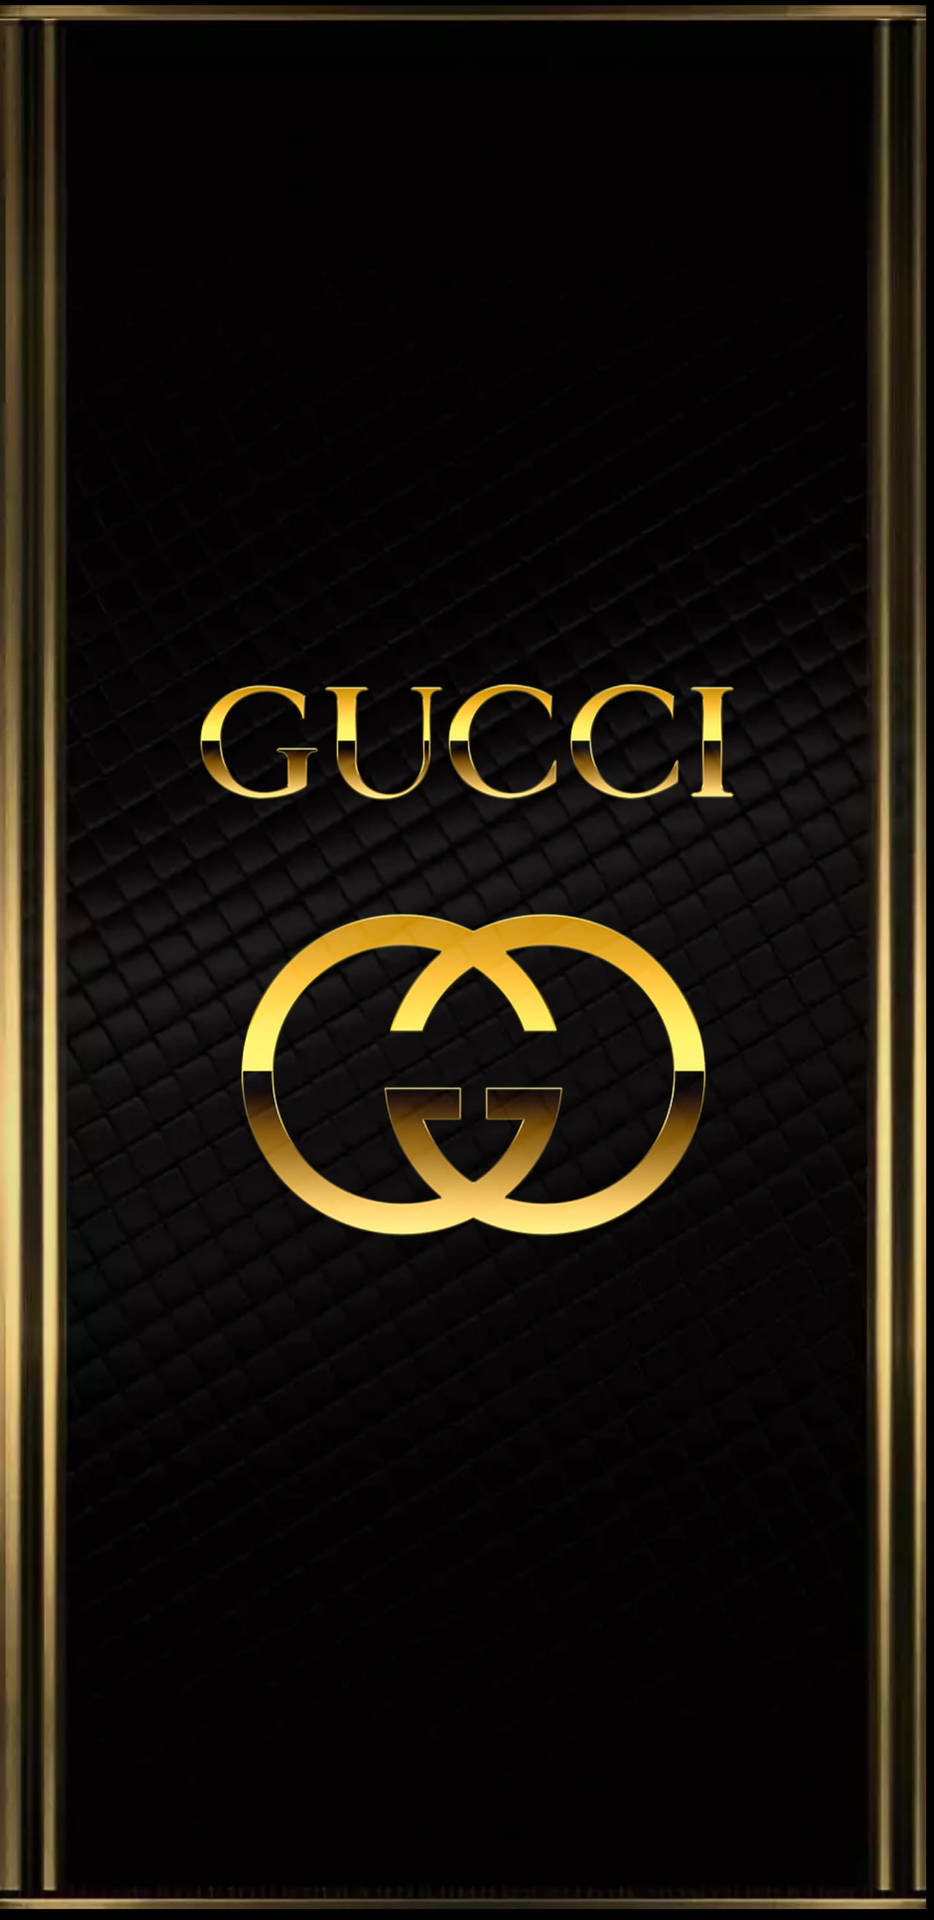 Gucci Iphone Background Wallpaper